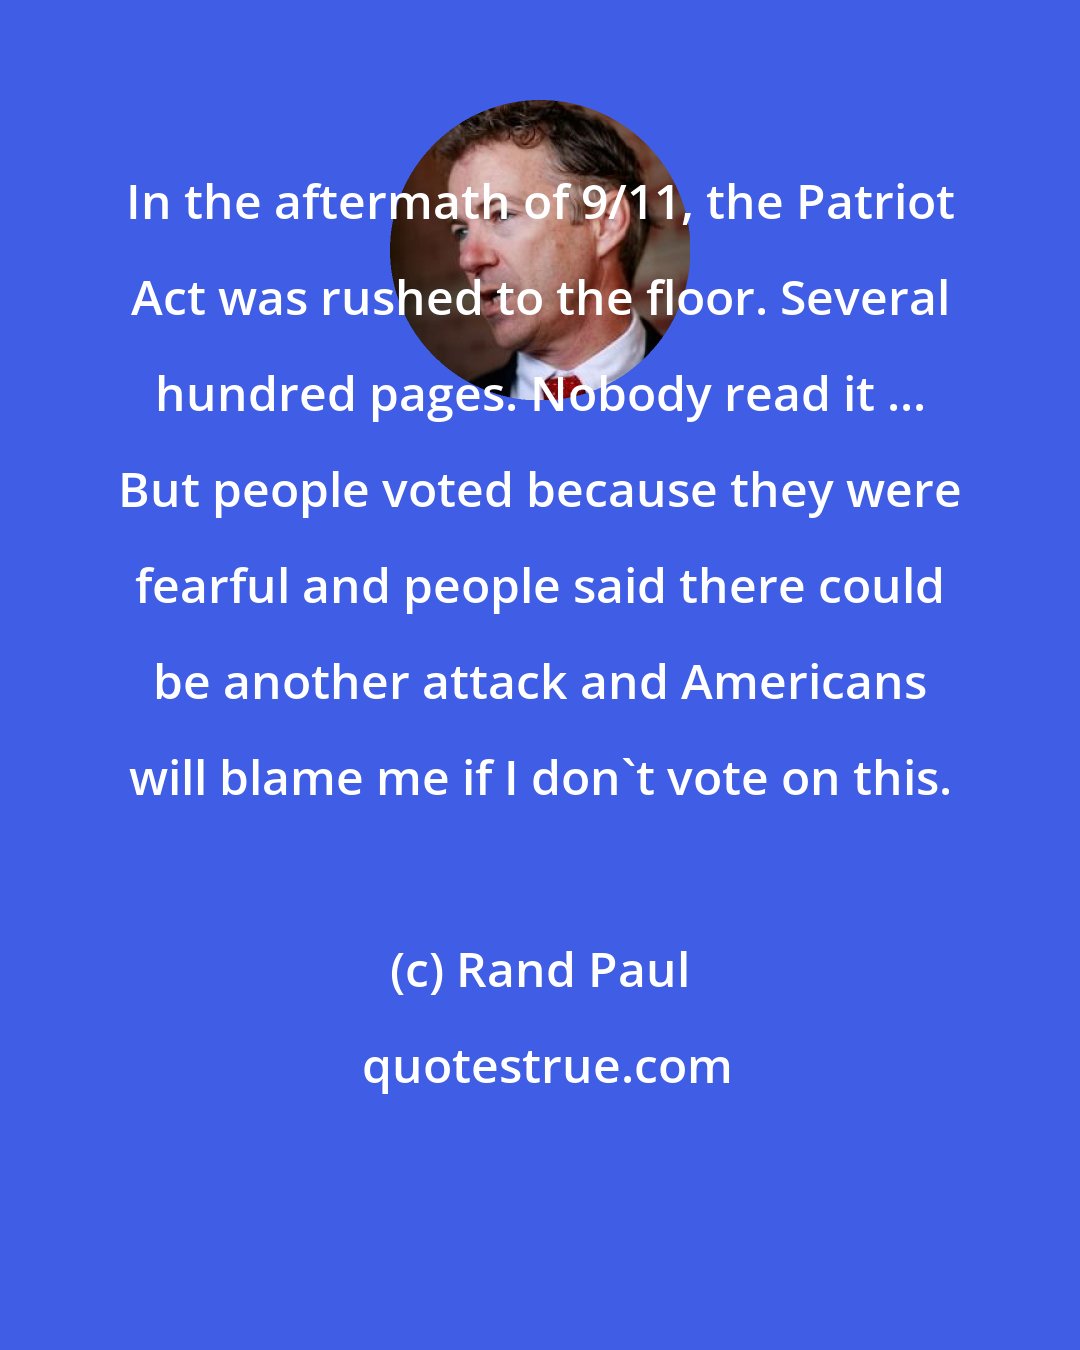 Rand Paul: In the aftermath of 9/11, the Patriot Act was rushed to the floor. Several hundred pages. Nobody read it ... But people voted because they were fearful and people said there could be another attack and Americans will blame me if I don't vote on this.